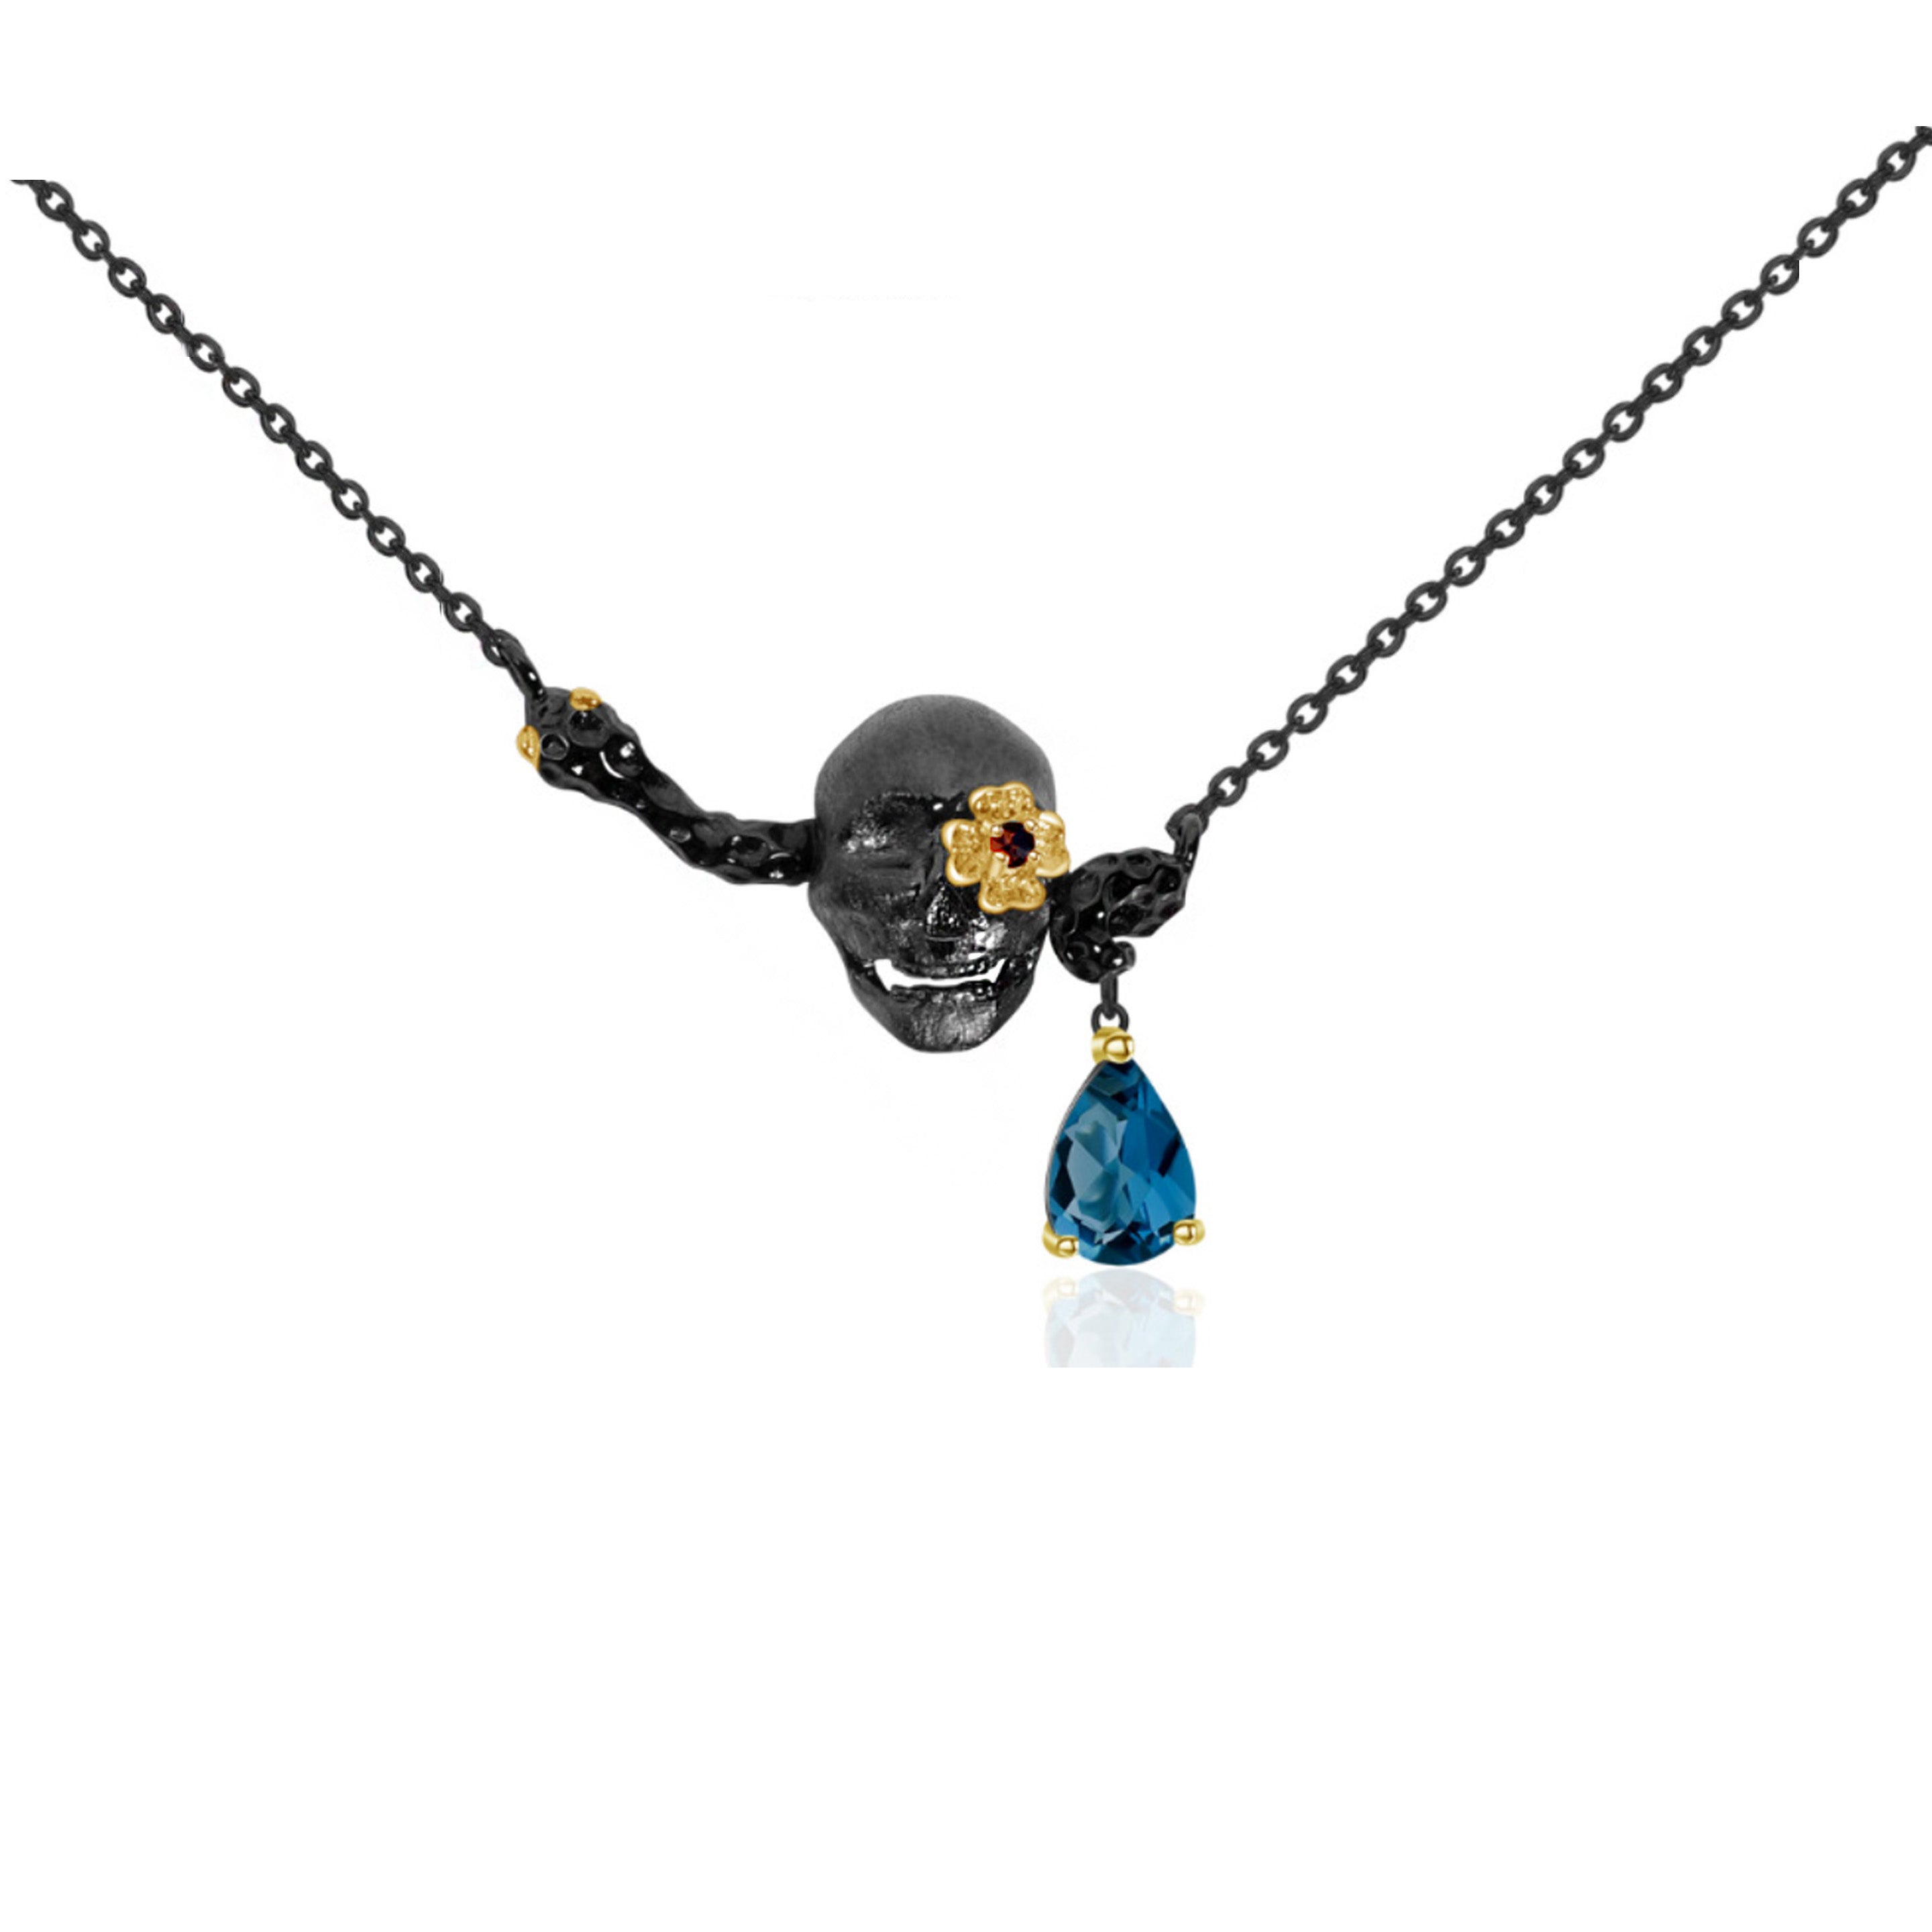 An oxidised black skull necklace. The necklace features a blue topaz and pink ruby stone adding colour to the design.